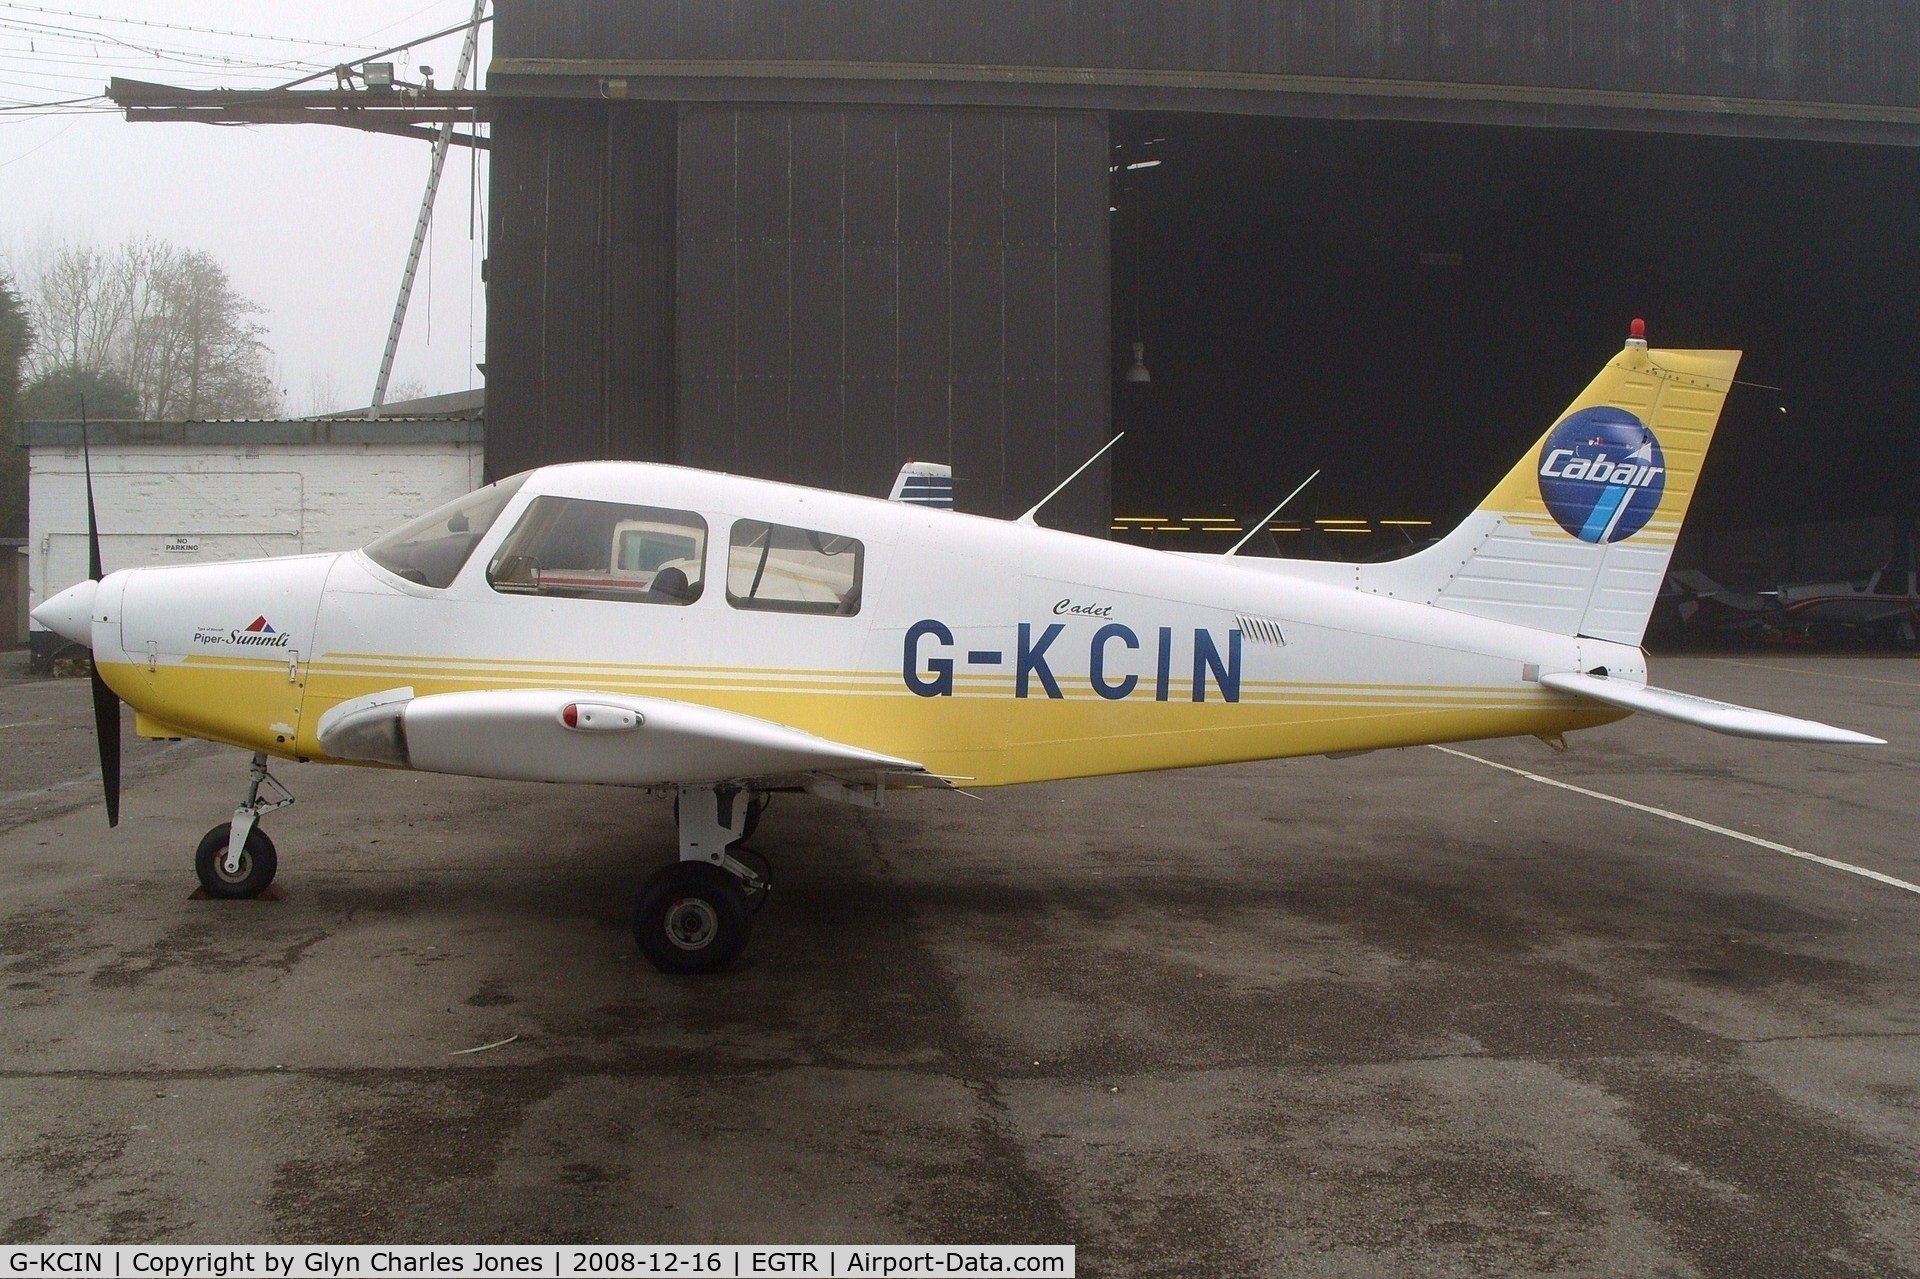 G-KCIN, 1989 Piper PA-28-161 Cadet C/N 2841102, Taken on a quiet cold and foggy day. With thanks to Elstree control tower who granted me authority to take photographs on the aerodrome. Previously G-CDOX. Operated by Cabair.